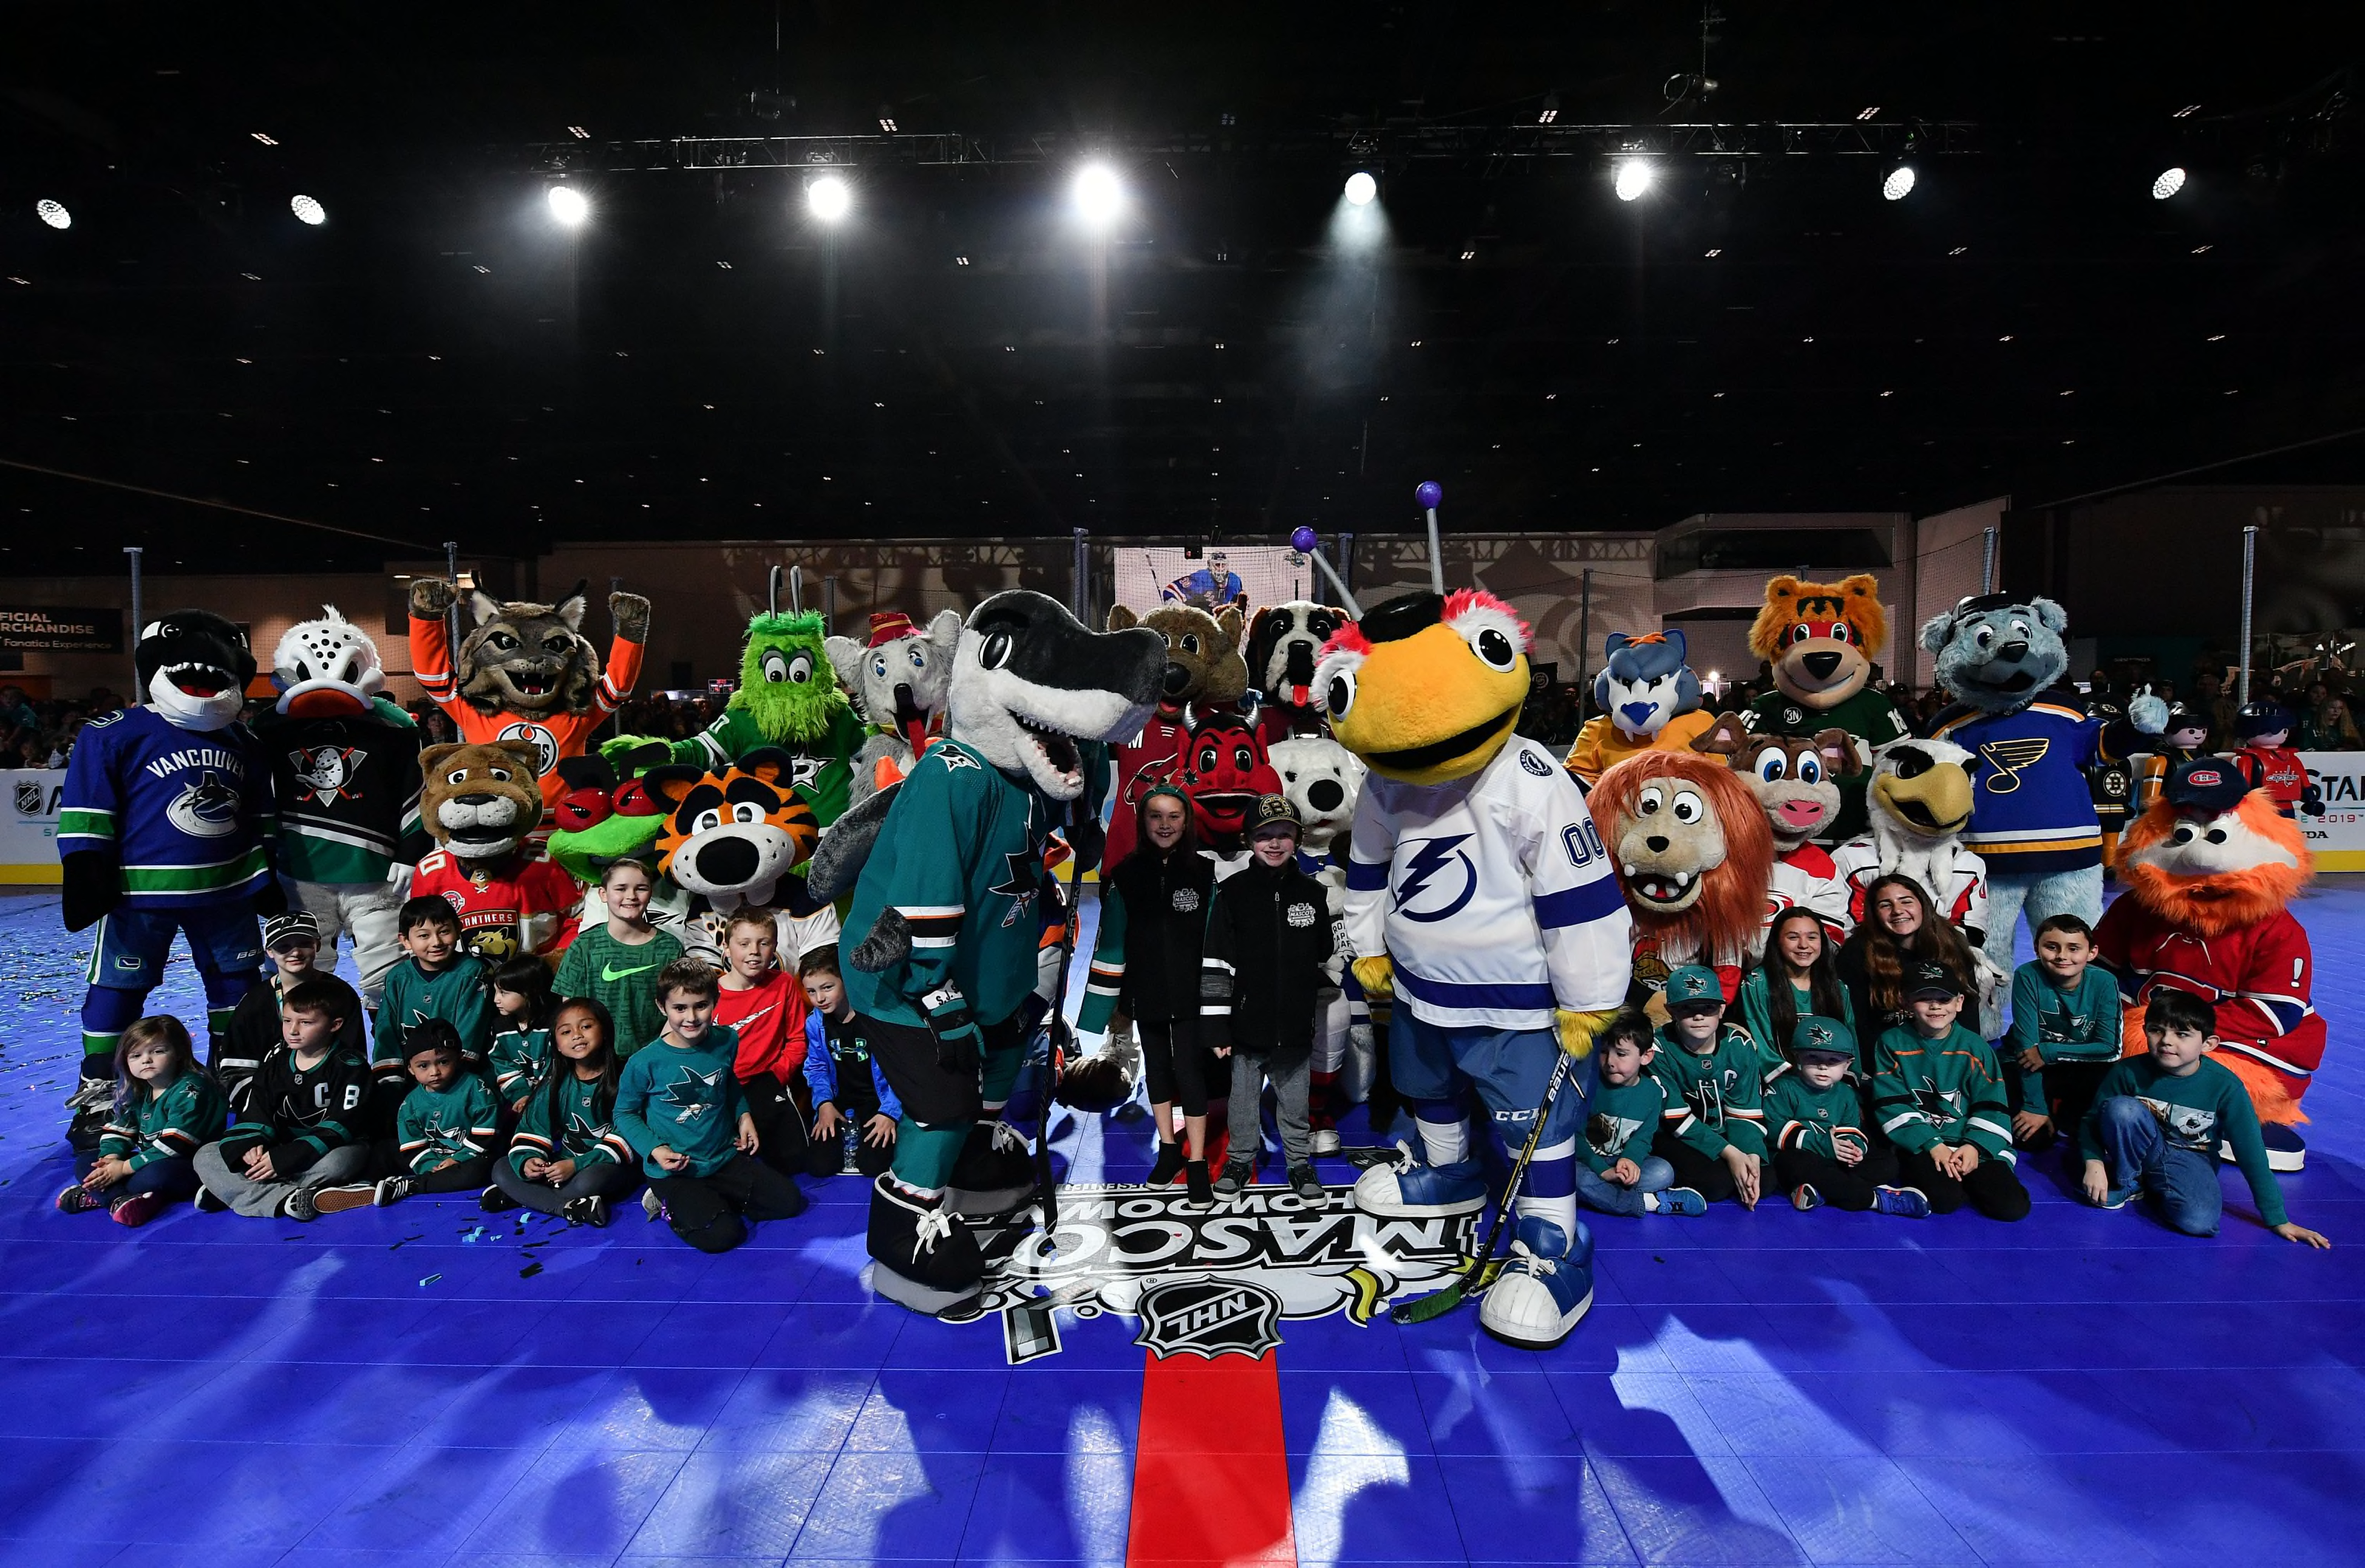 NHL Power Rankings: Ranking each mascot from worst to best - Page 3